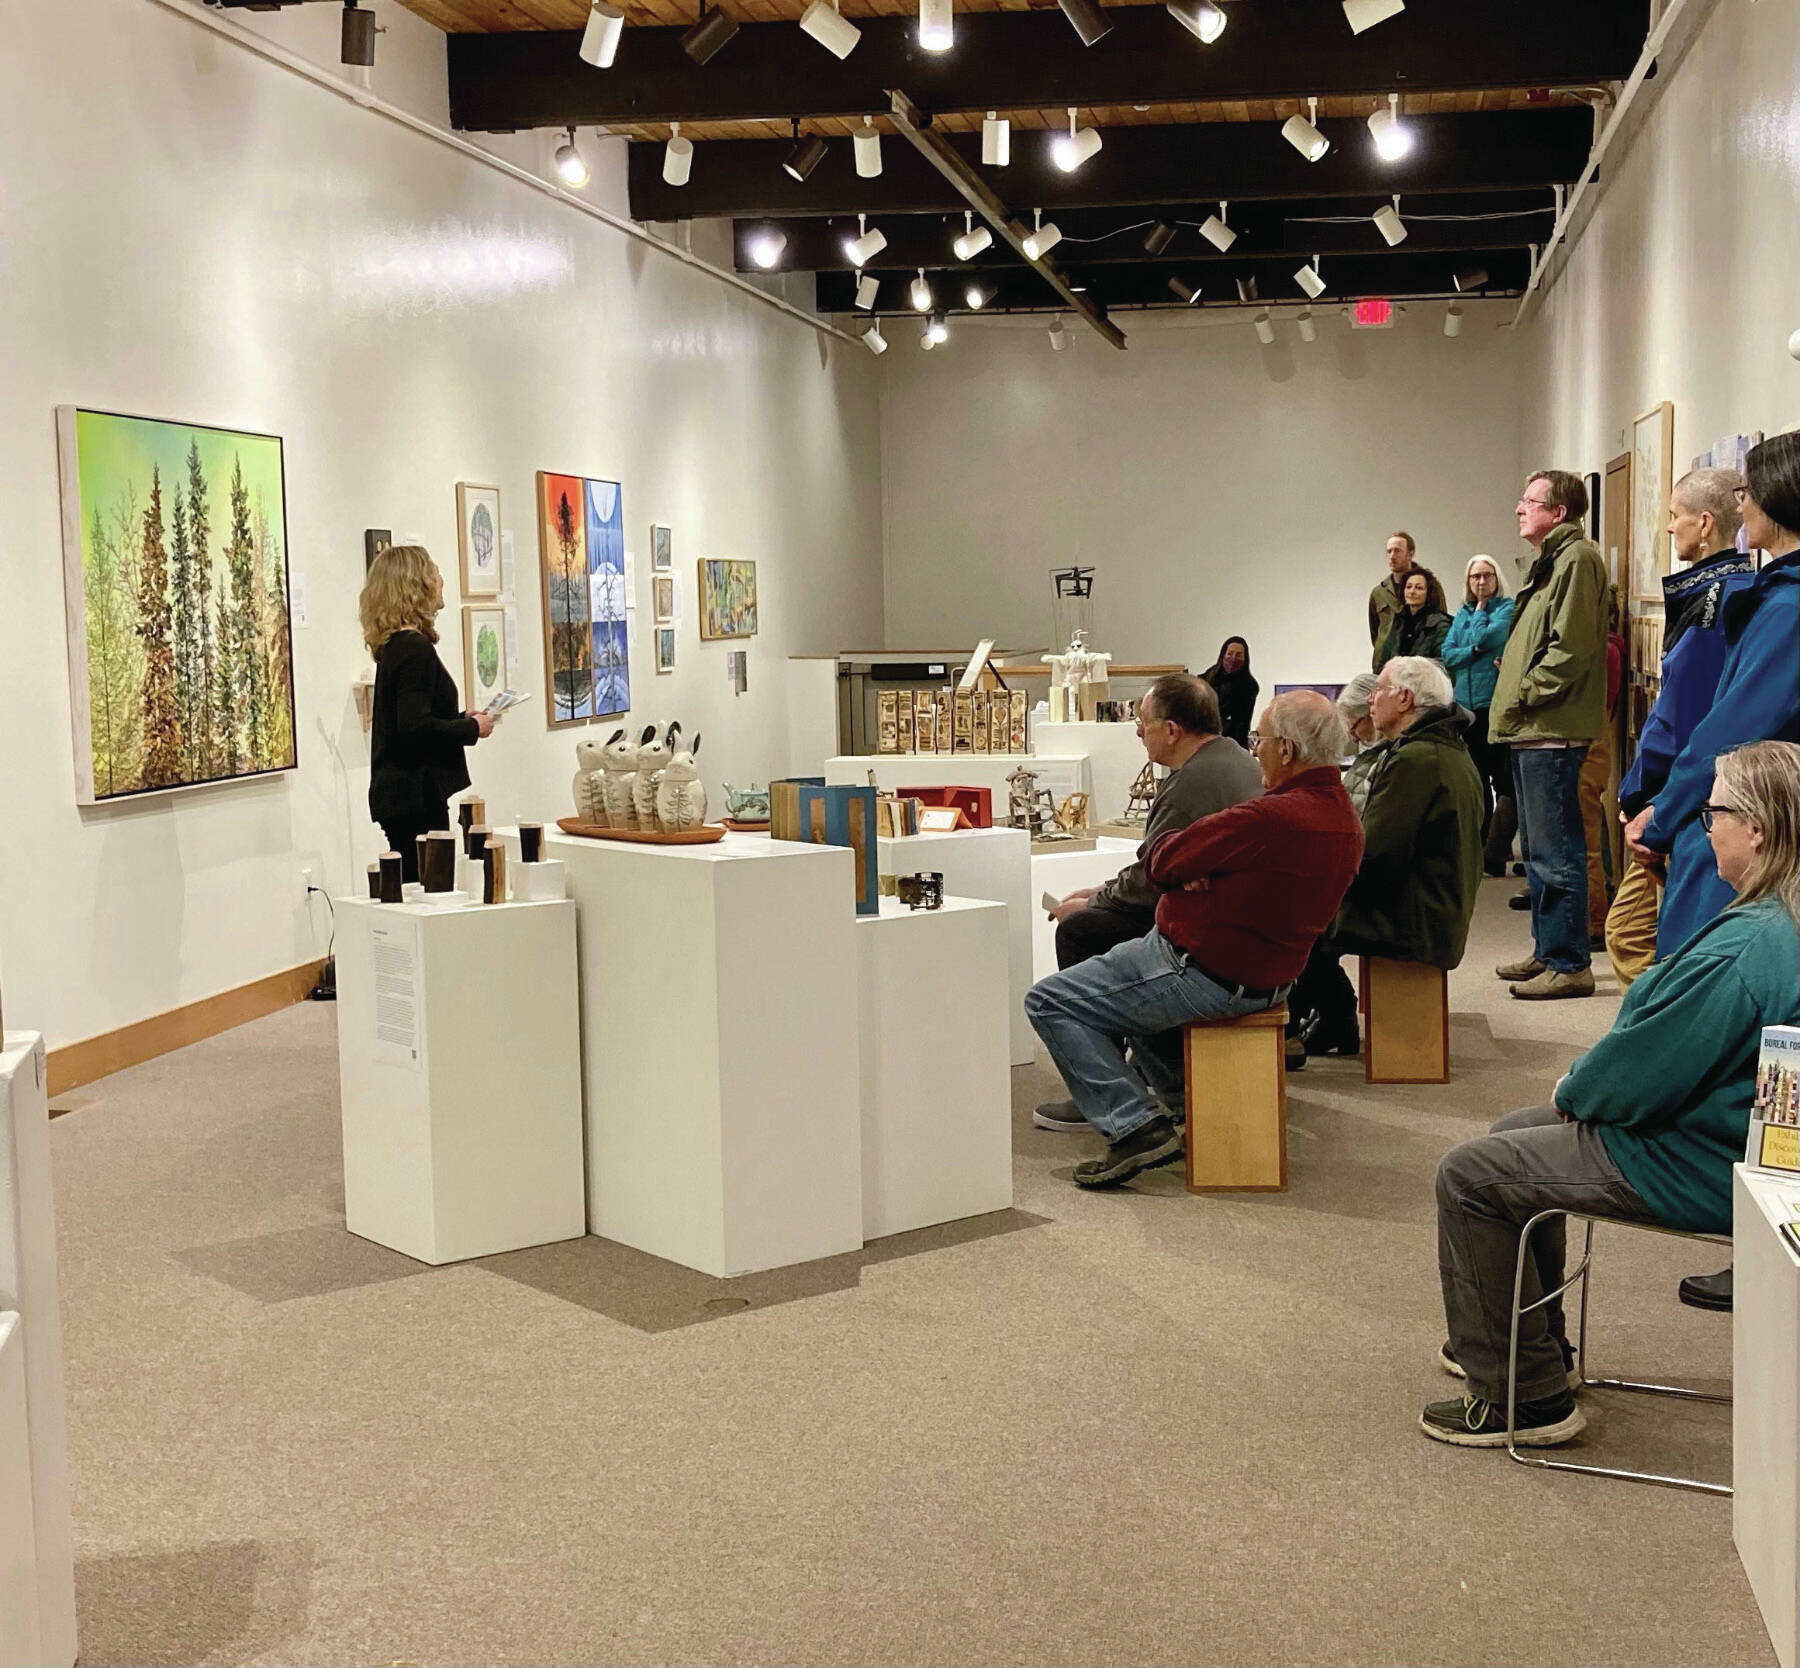 Photo provided by the Pratt Museum
“Boreal Forests,” the sixth in a series of special exhibits sponsored by the “In a Time of Change” collaborative, is featured at the Pratt Museum, May 25.